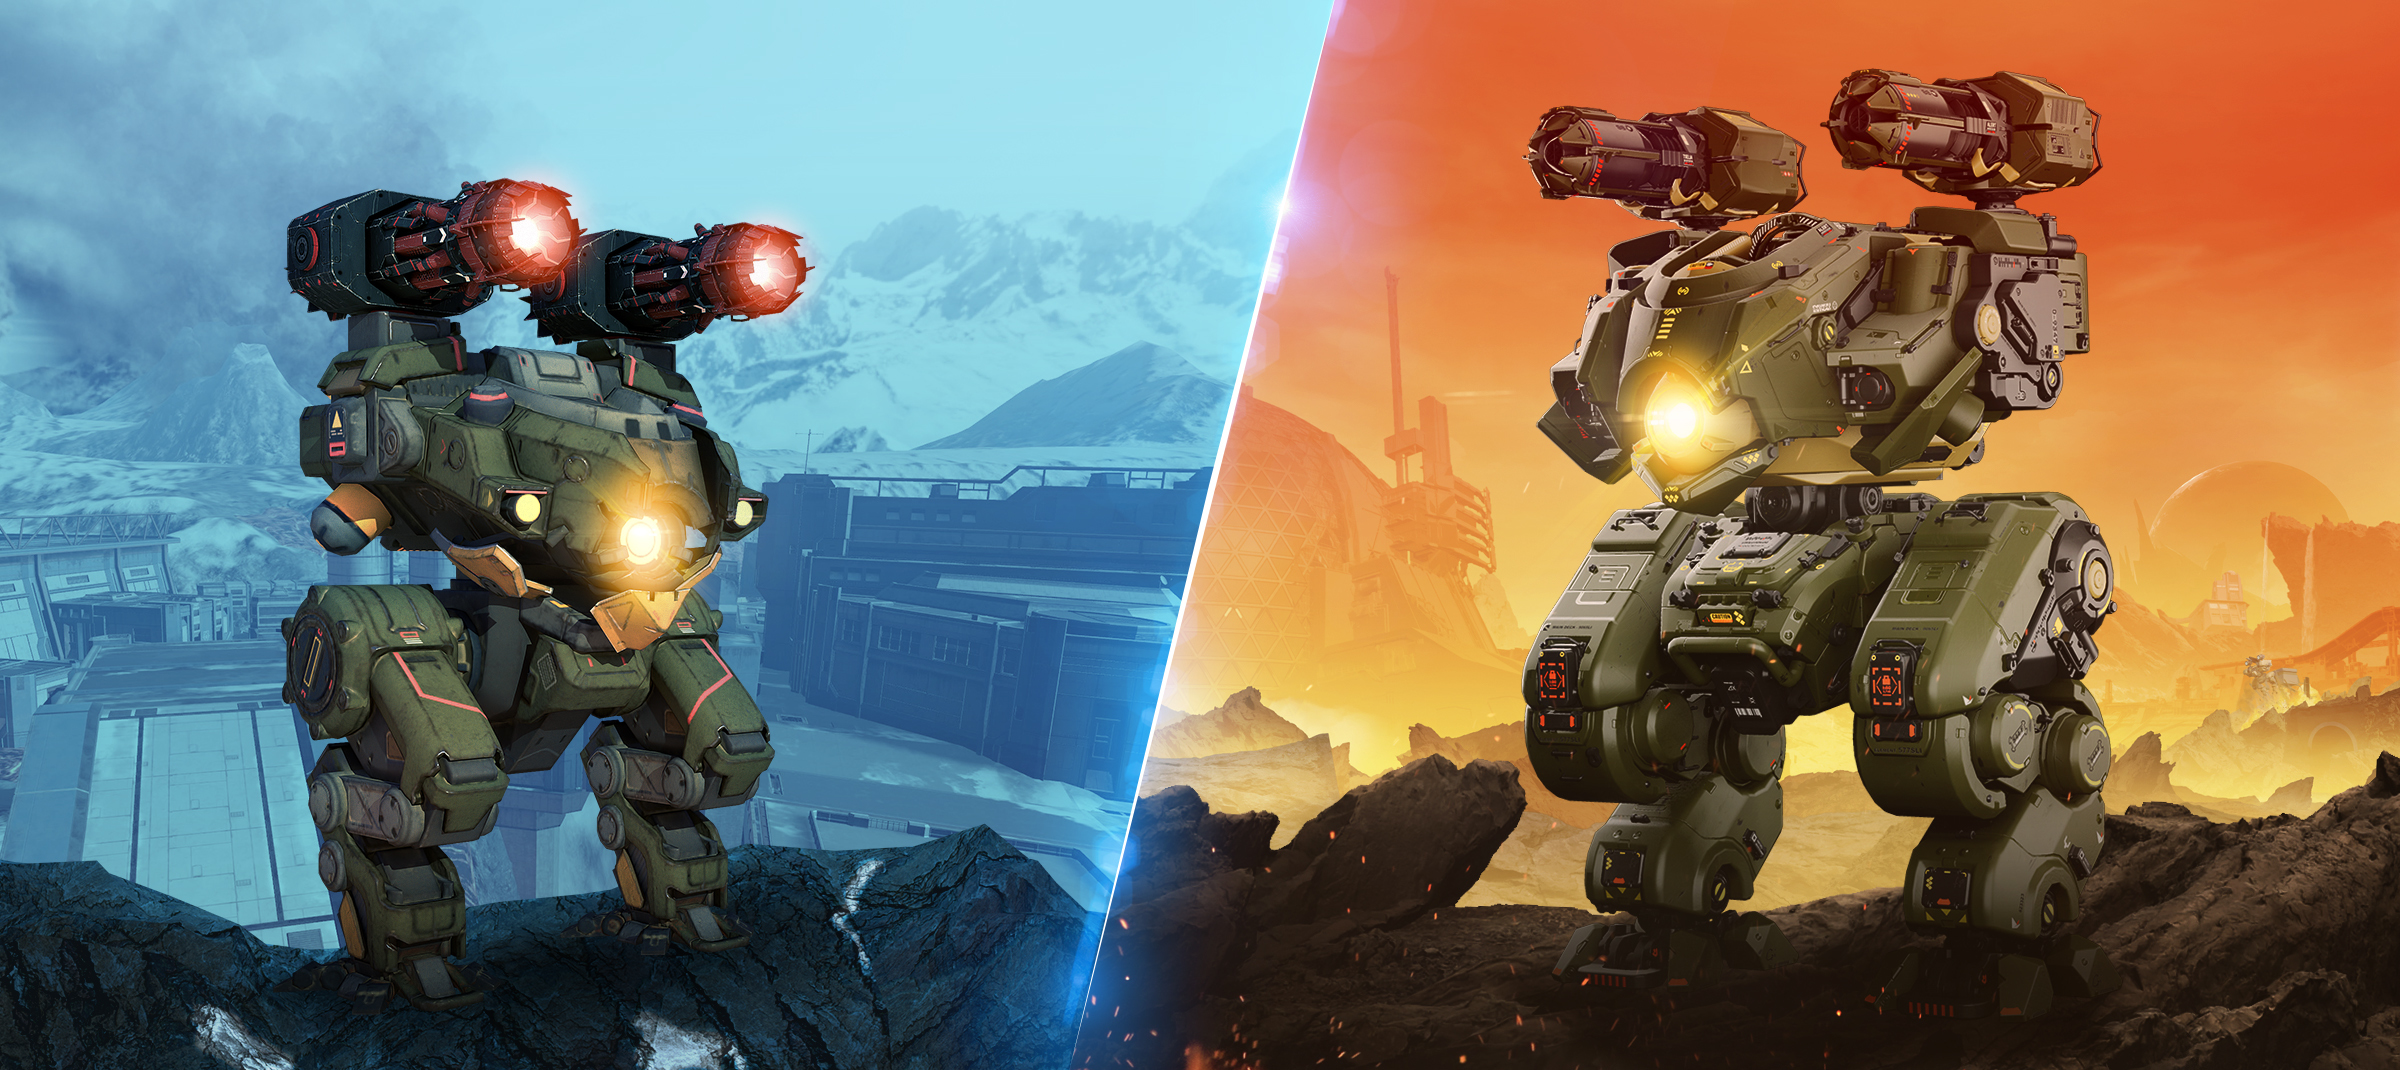 It's official: War Robots is more than just one game - Pixonic